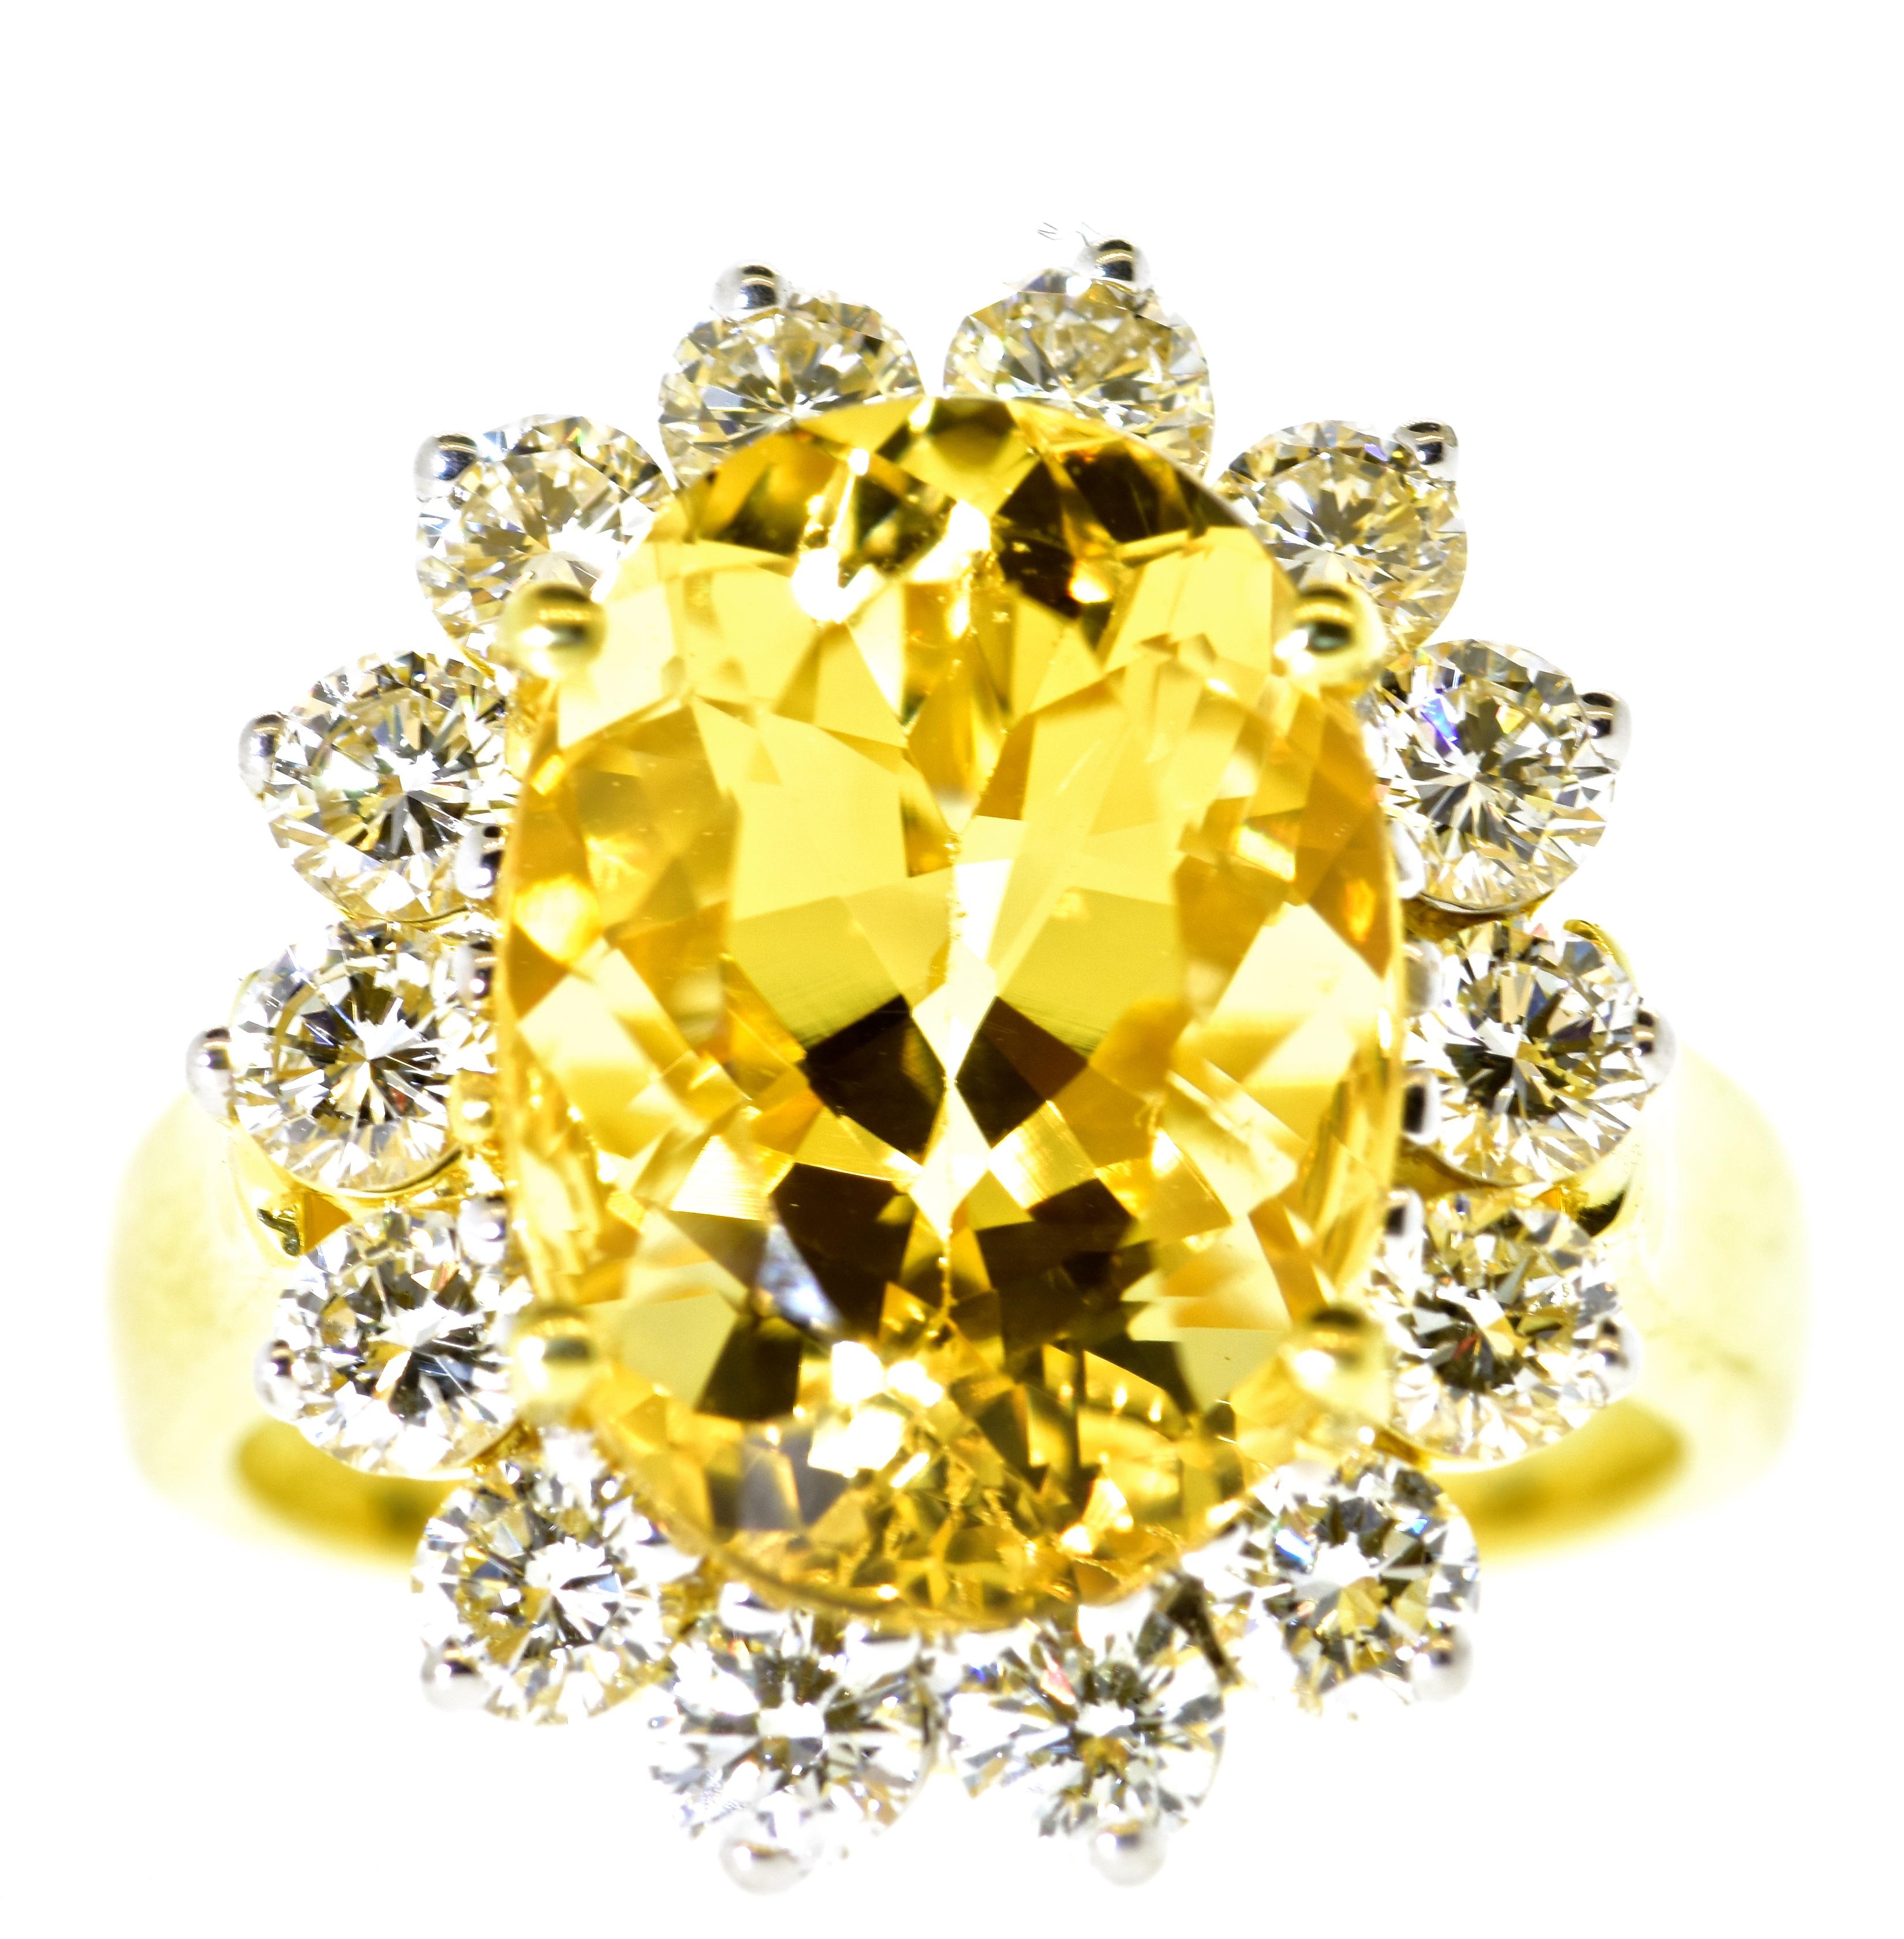 Diamond and Yellow sapphire possessing a fine bright pleasing yellow color is prong set in this 18K contemporary gold ring.  The  natural yellow sapphire weighs exactly 6.26 cts., and is surrounded by 14 fine white brilliant cut diamonds.  These